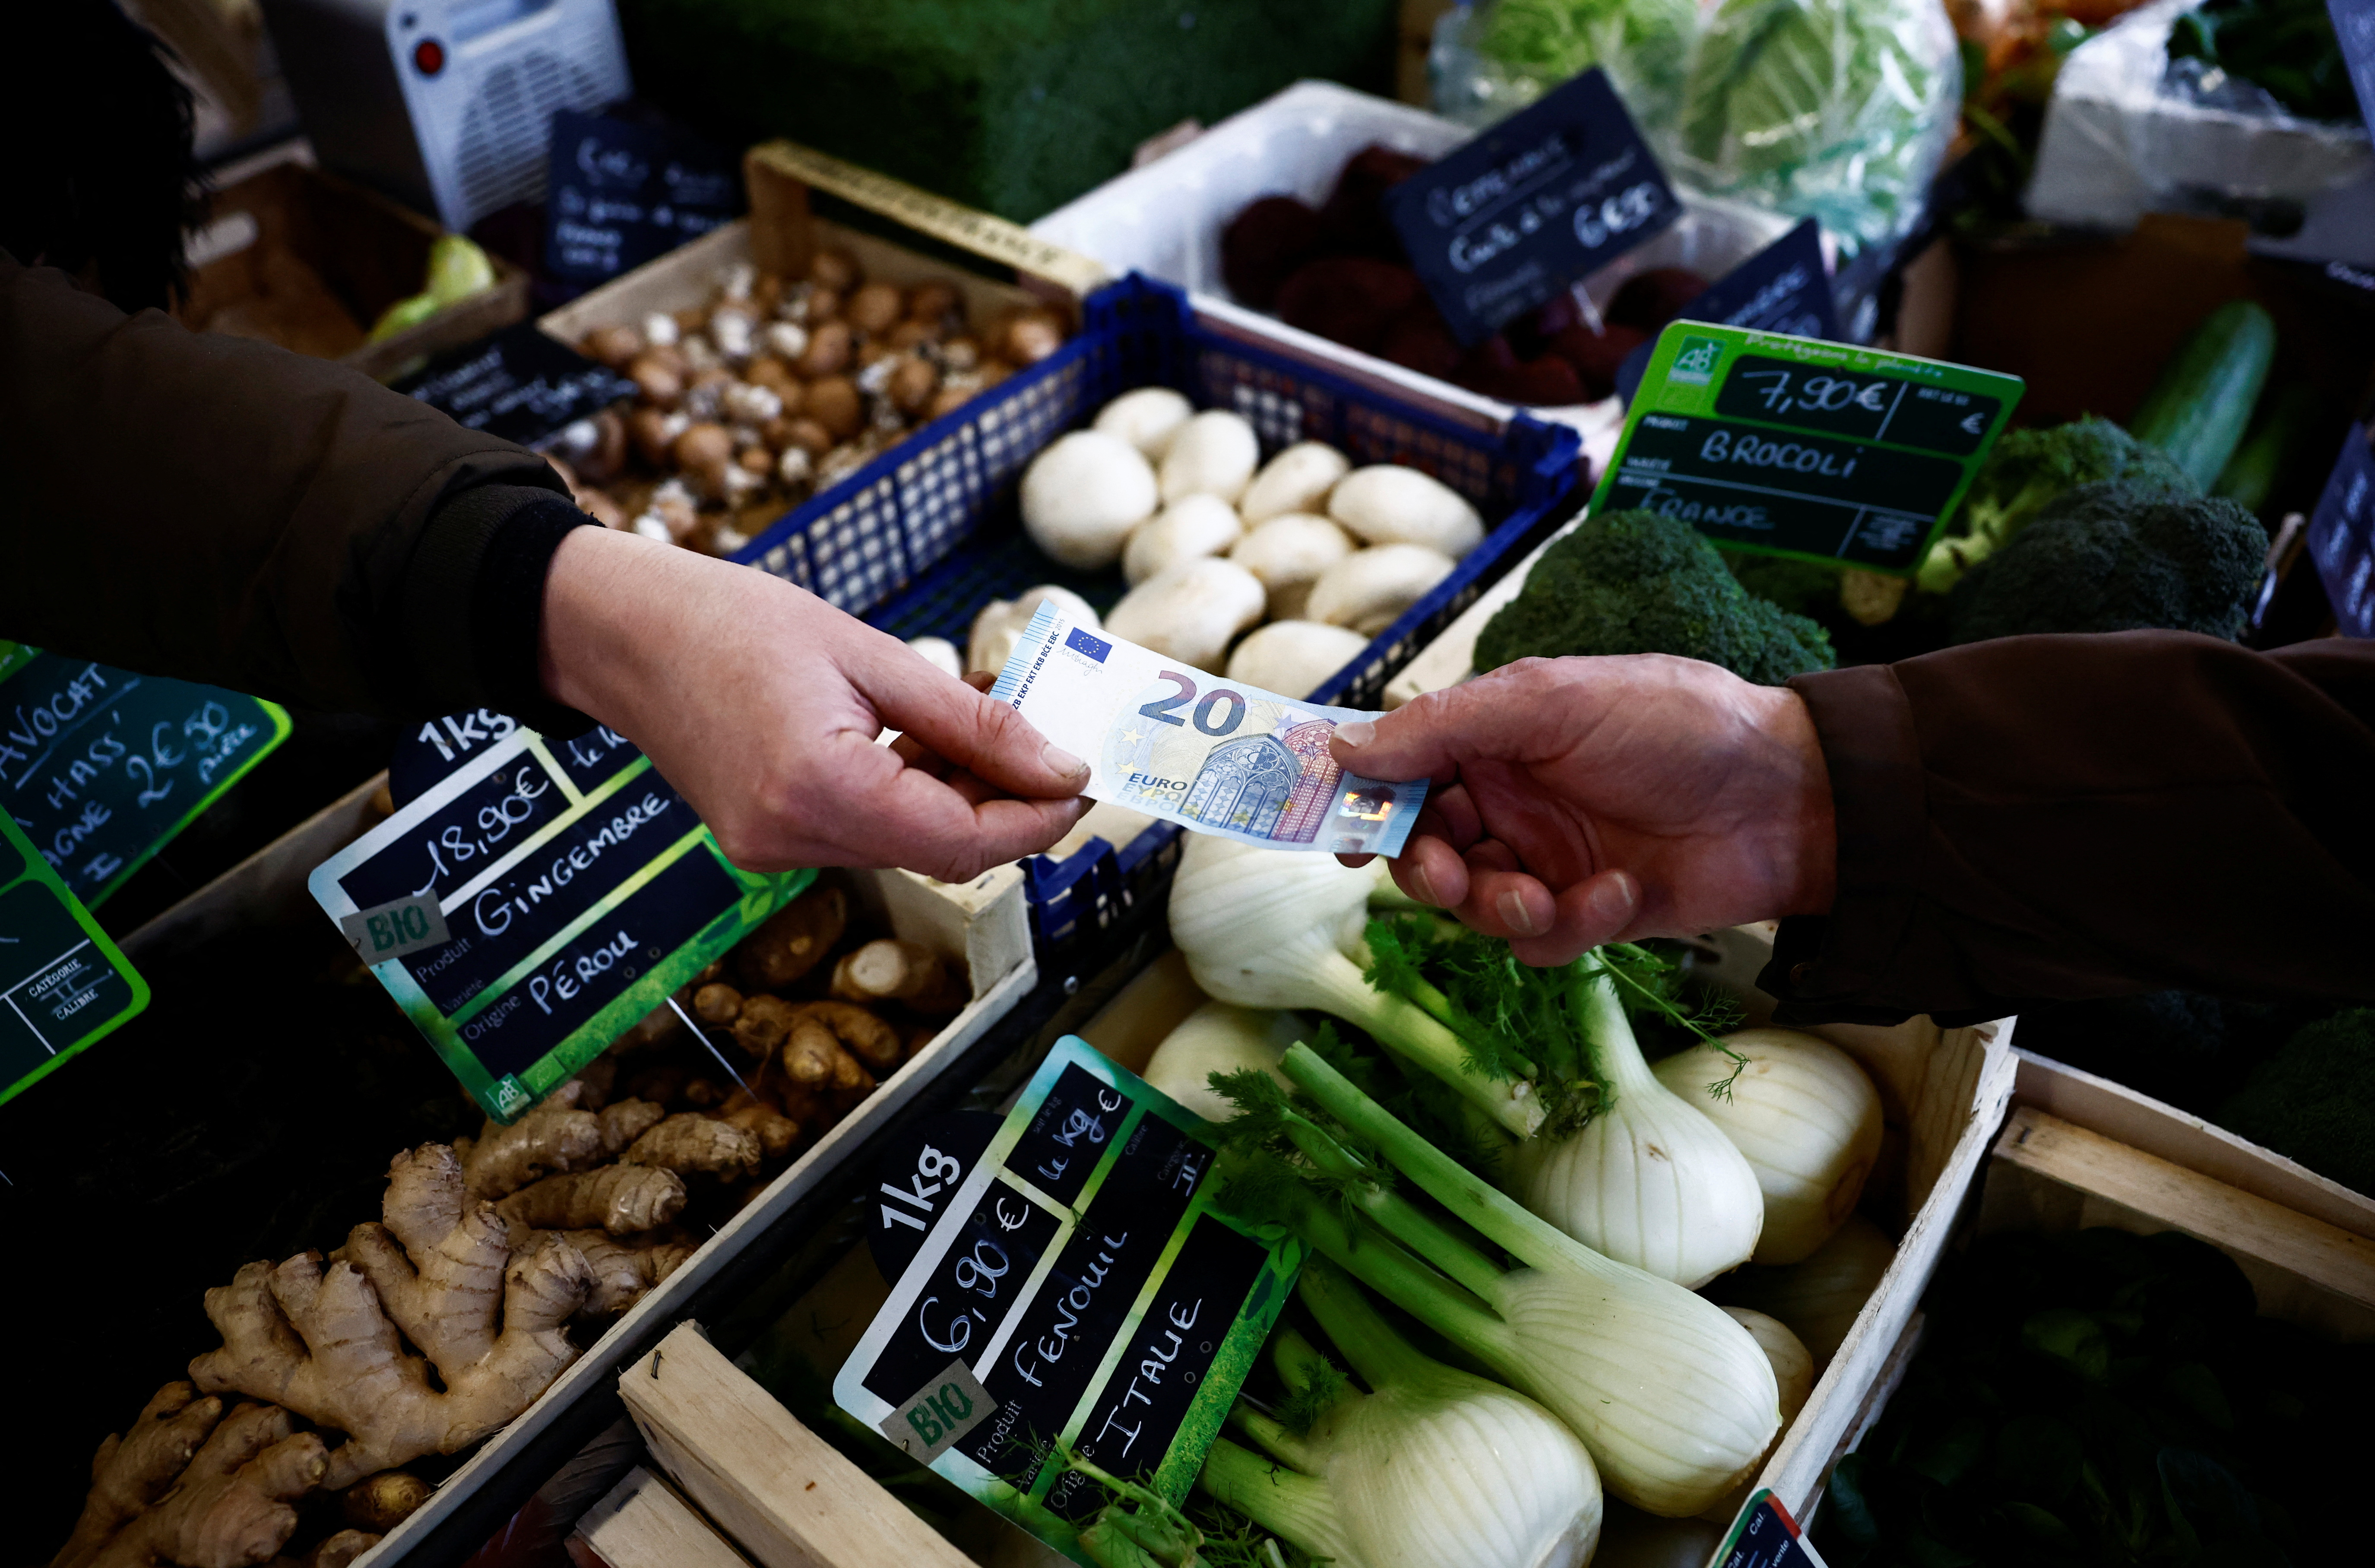 A shopper pays with a twenty Euro bank note at a local market in Nantes